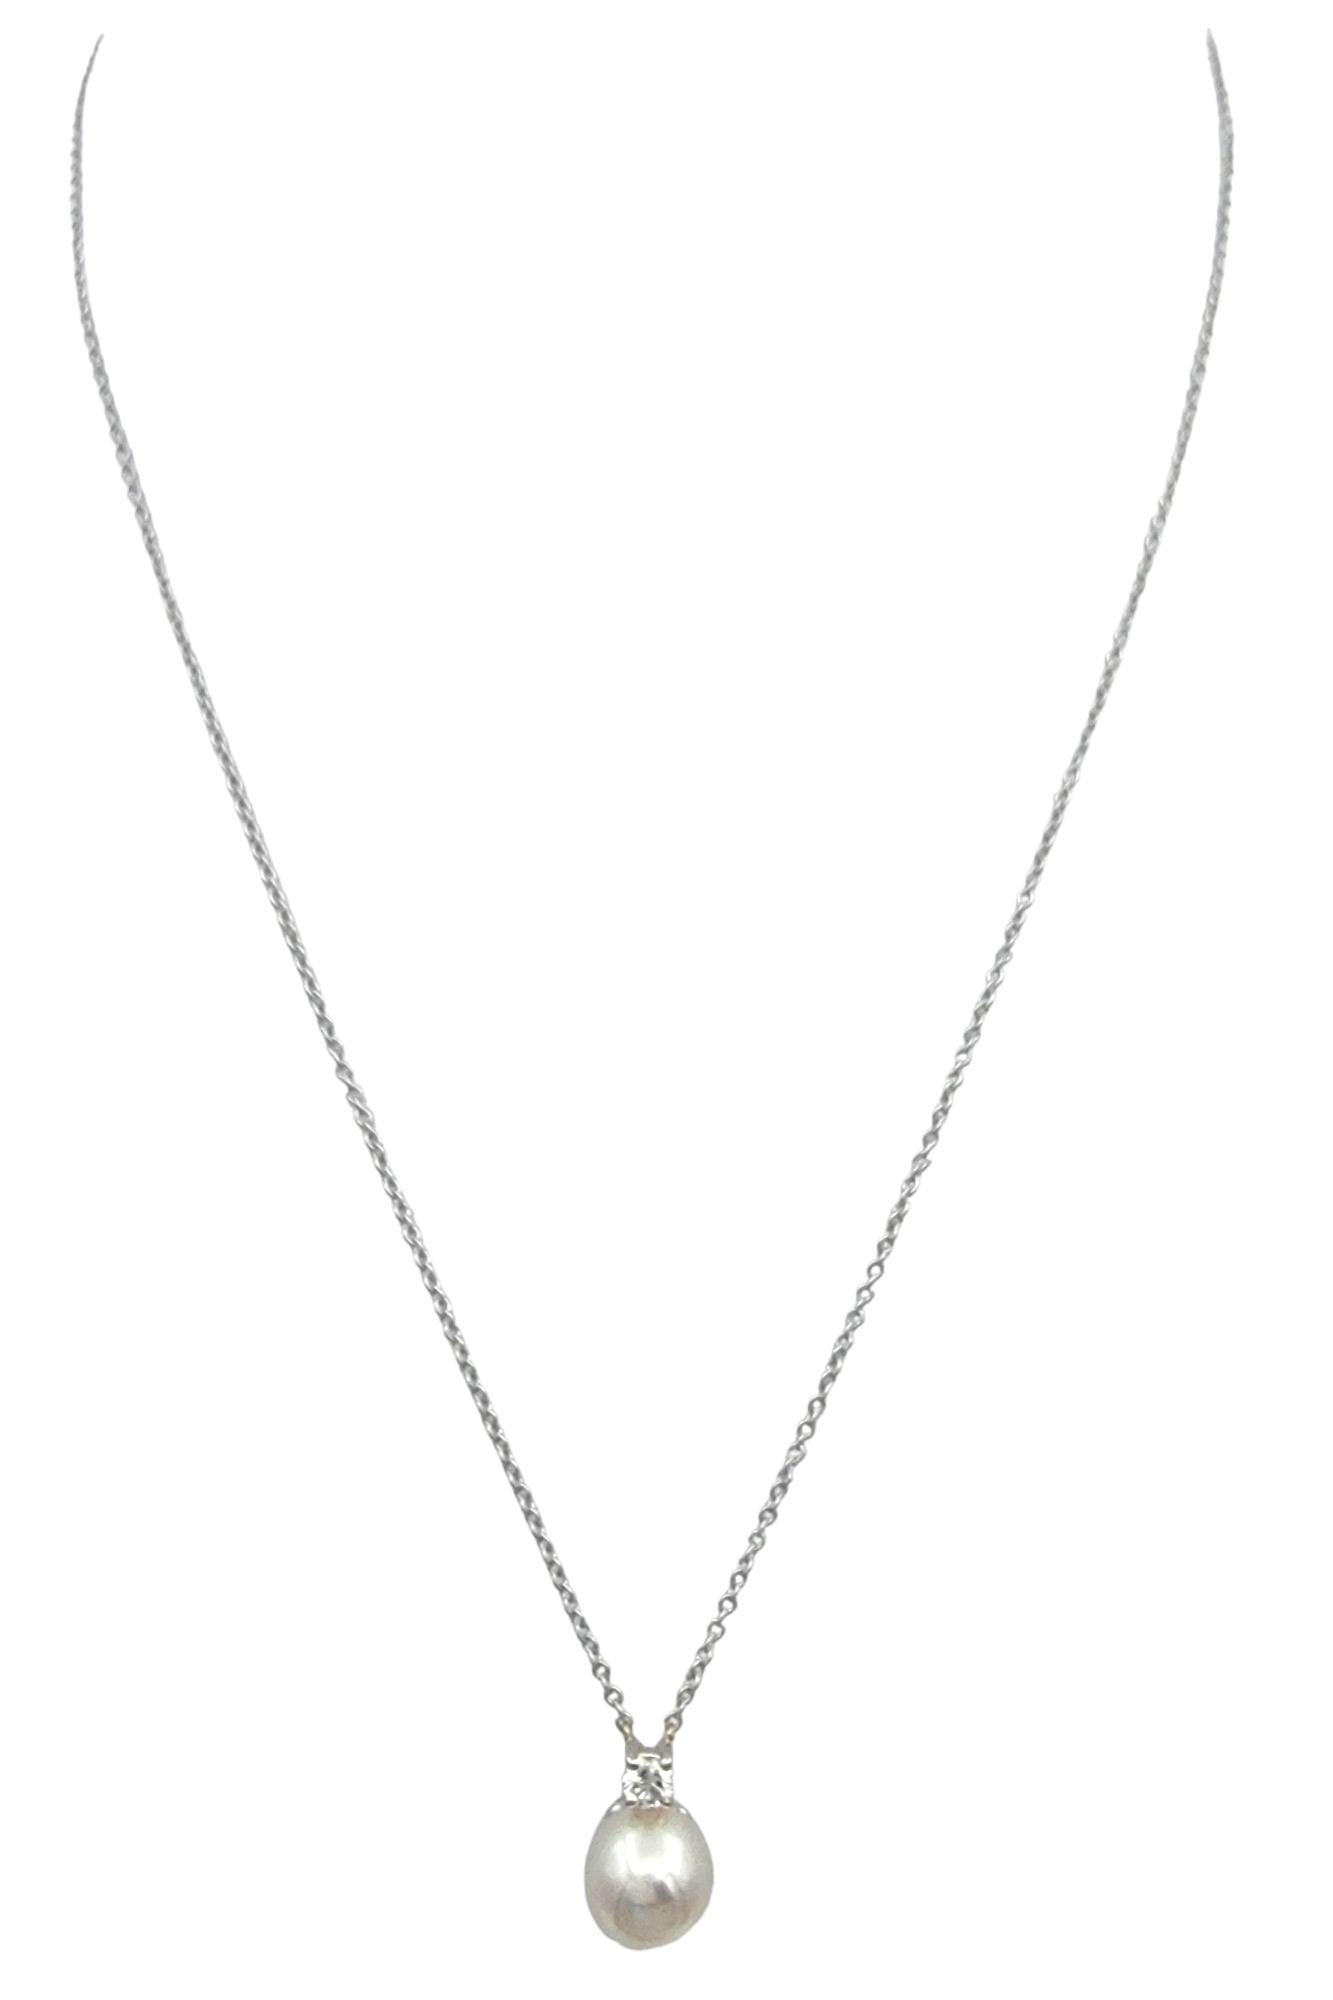 Contemporary Tiffany & Co. Signature Pearl and Diamond Pendant Necklace Set in 18 Karat Gold